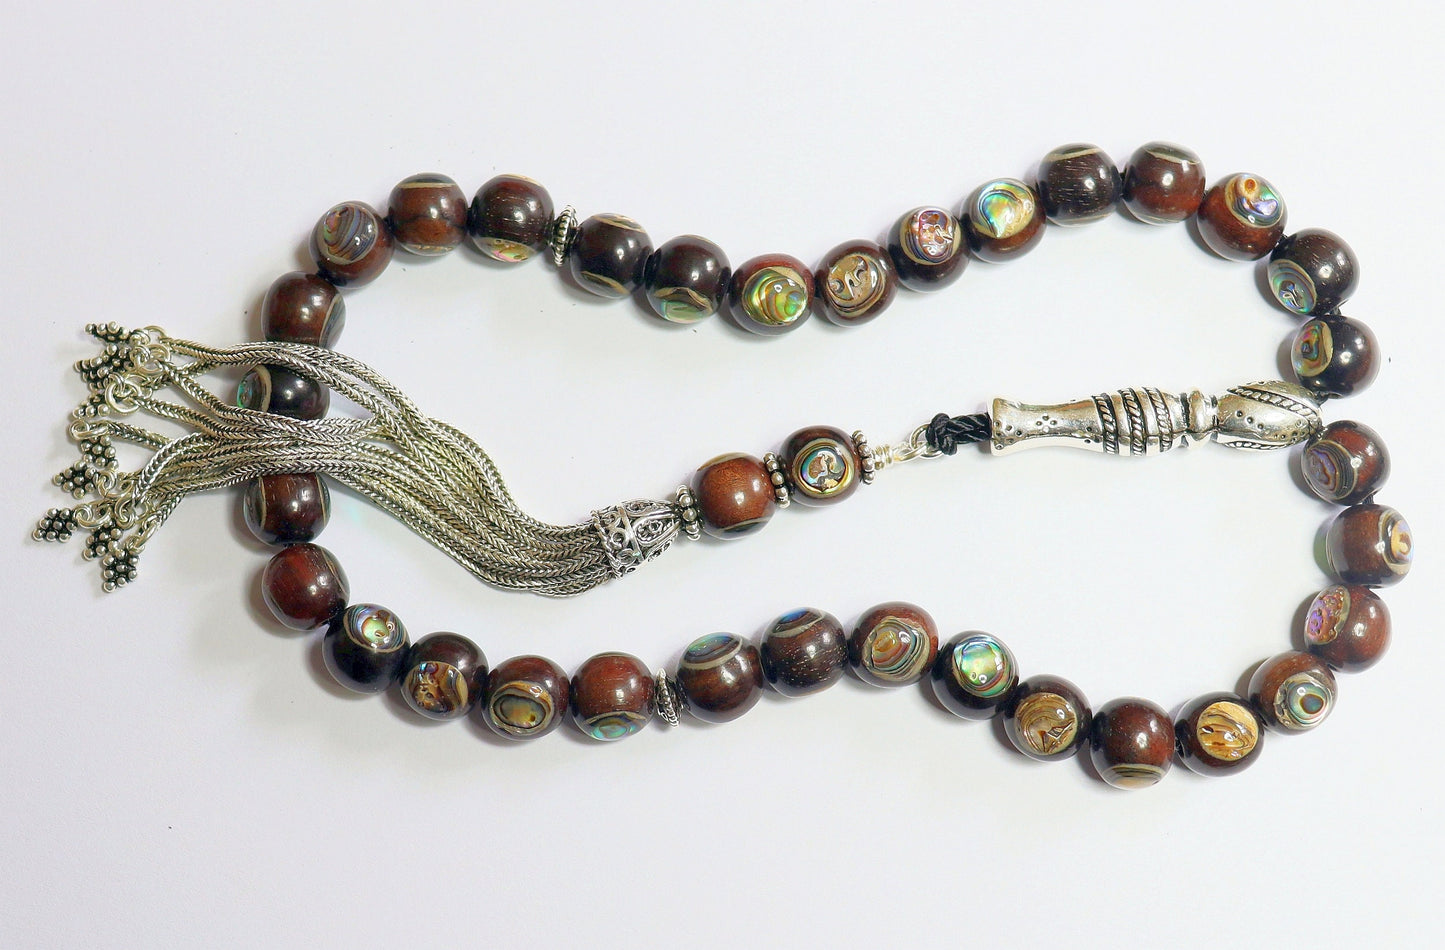 Tesbih Prayer Worry Beads Ebony Inlaid with Paua Shell - Sterling Silver - Unique Collector's XXR